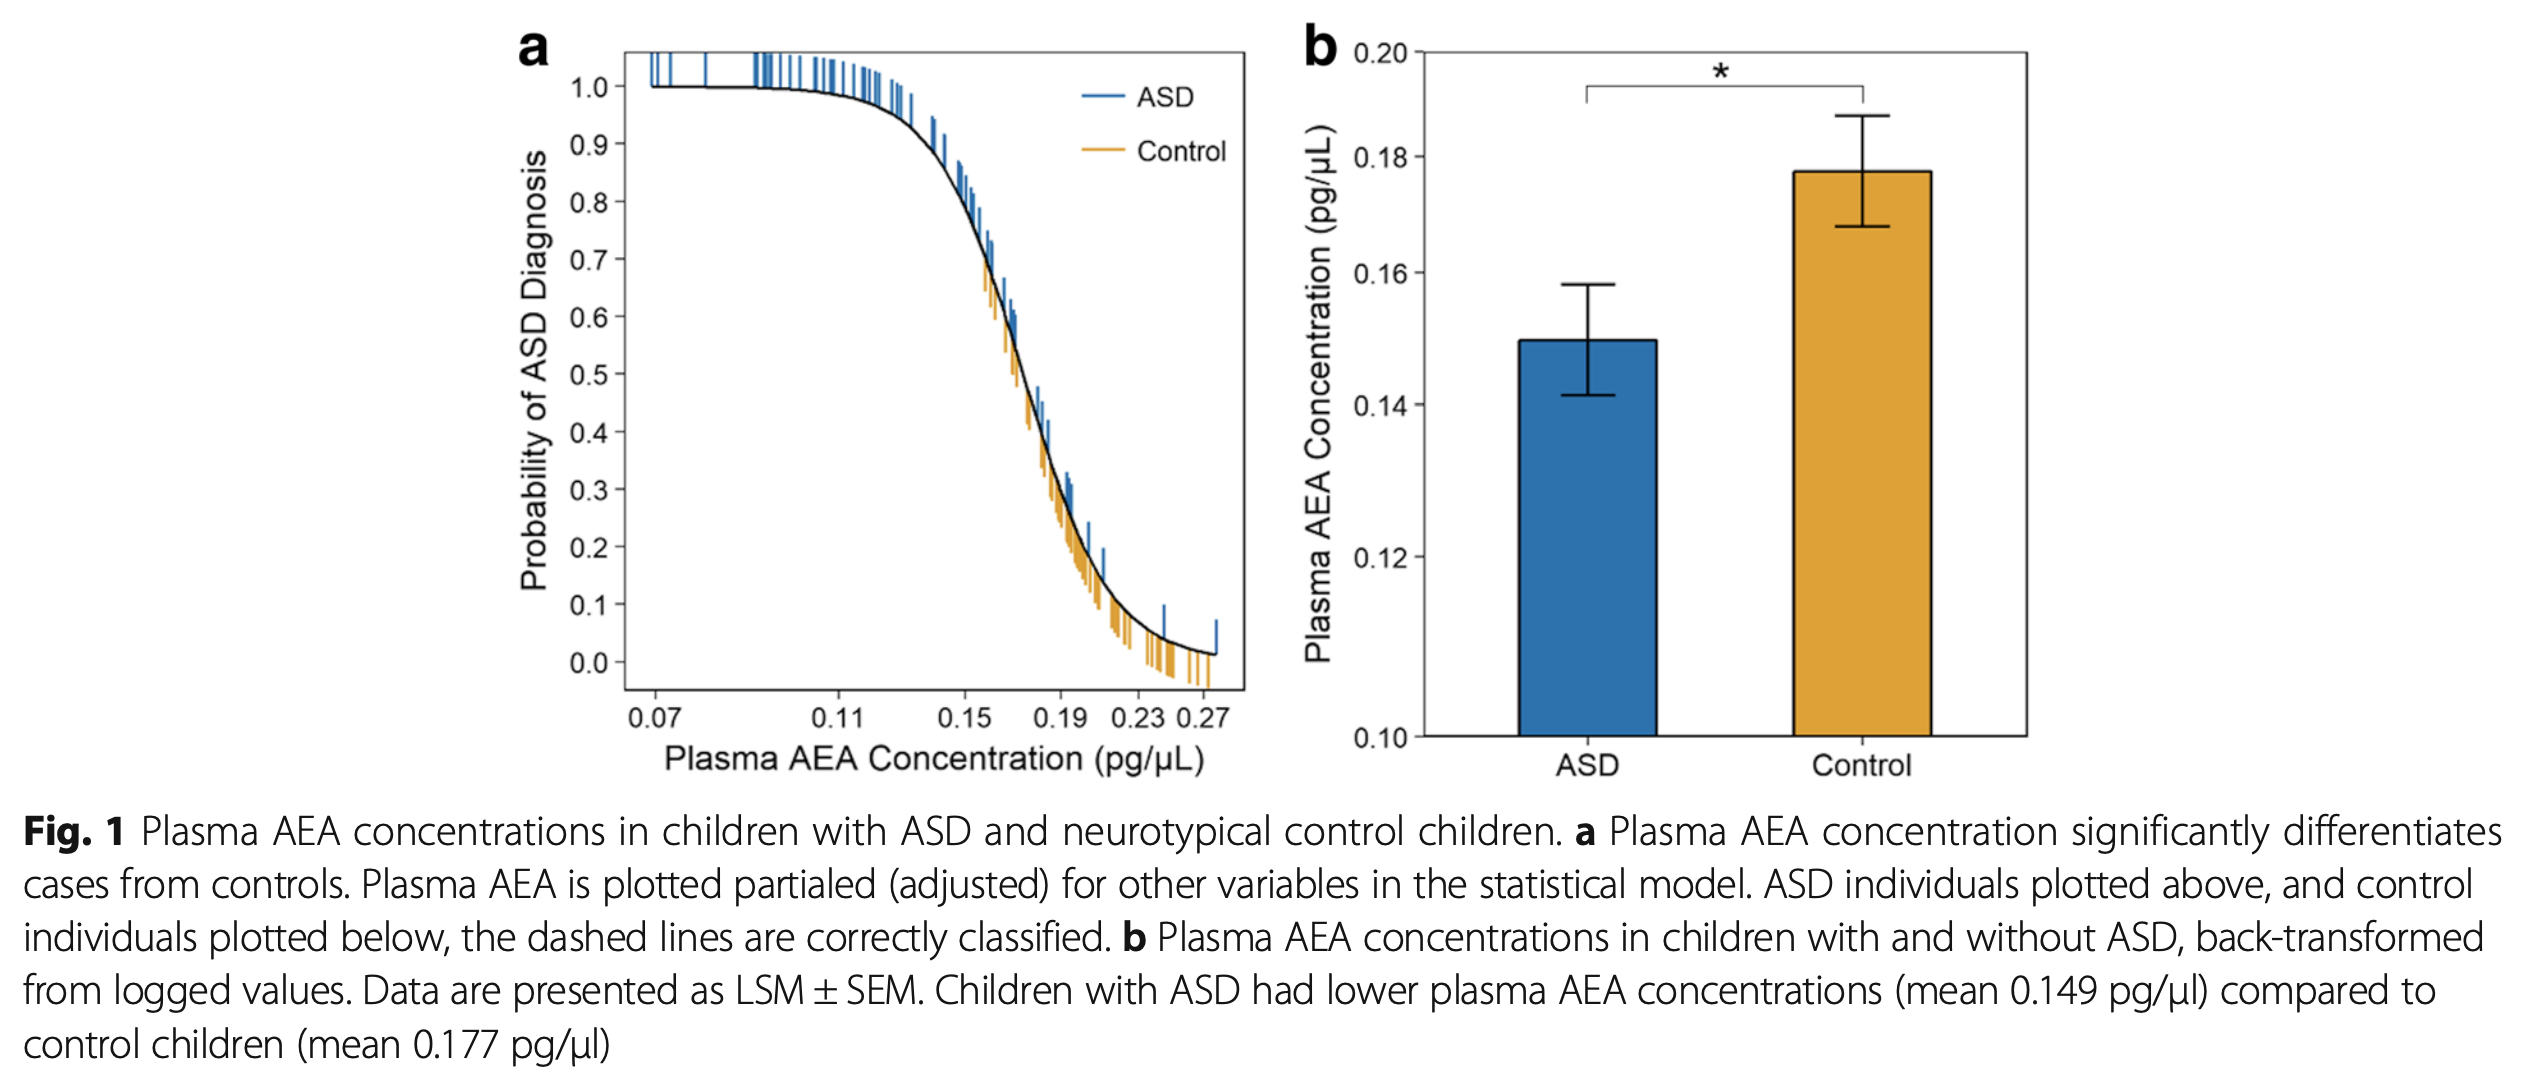 Plasma-anandamide-concentrations-are-lower-in-children-with-autism-spectrum-disorder